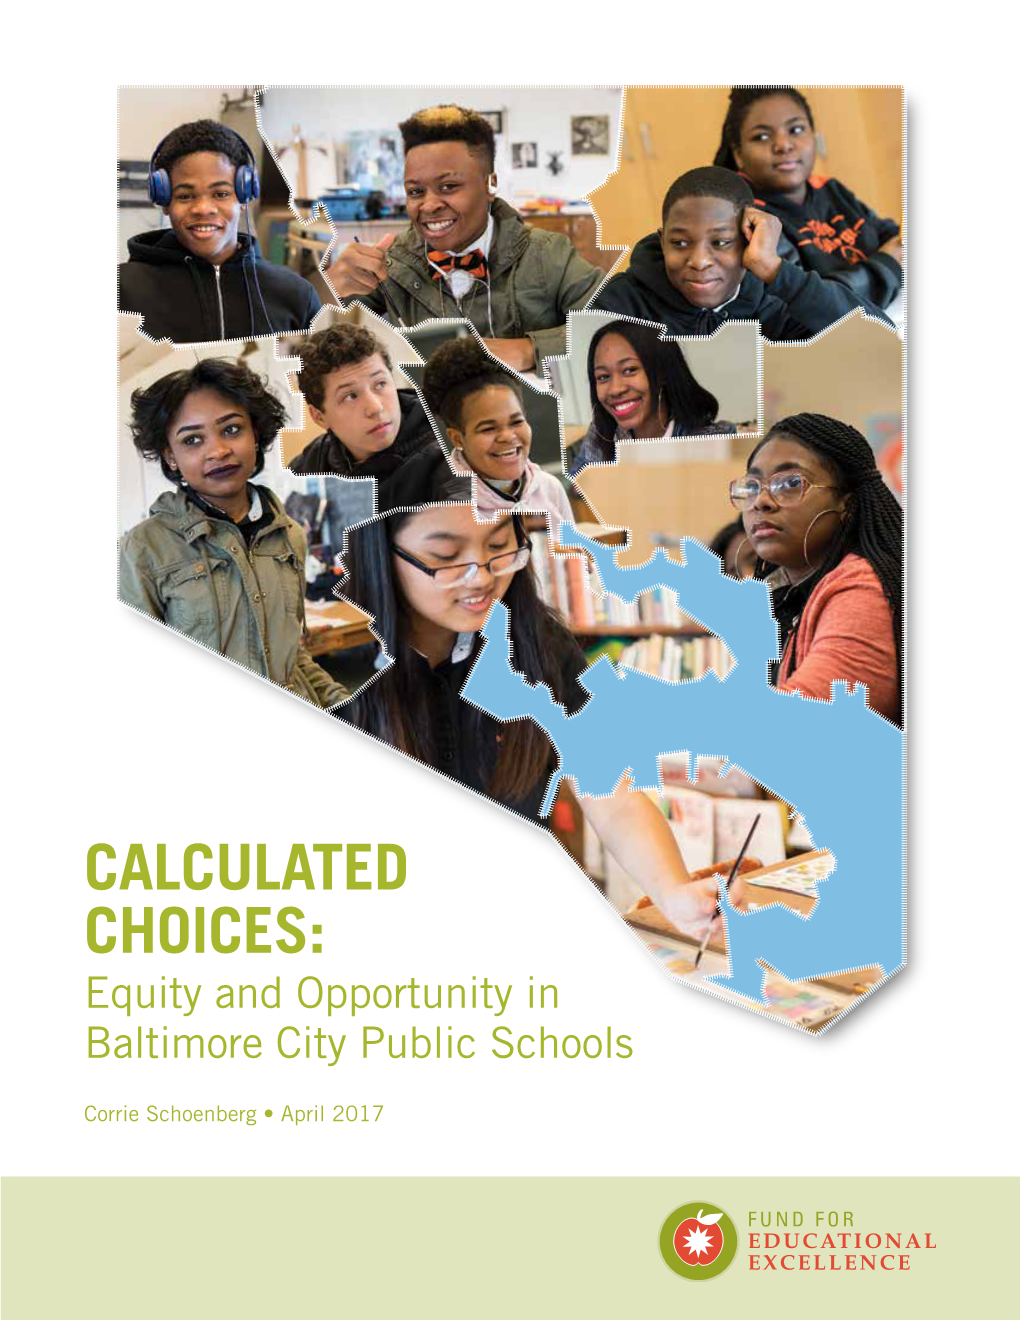 CALCULATED CHOICES: Equity and Opportunity in Baltimore City Public Schools